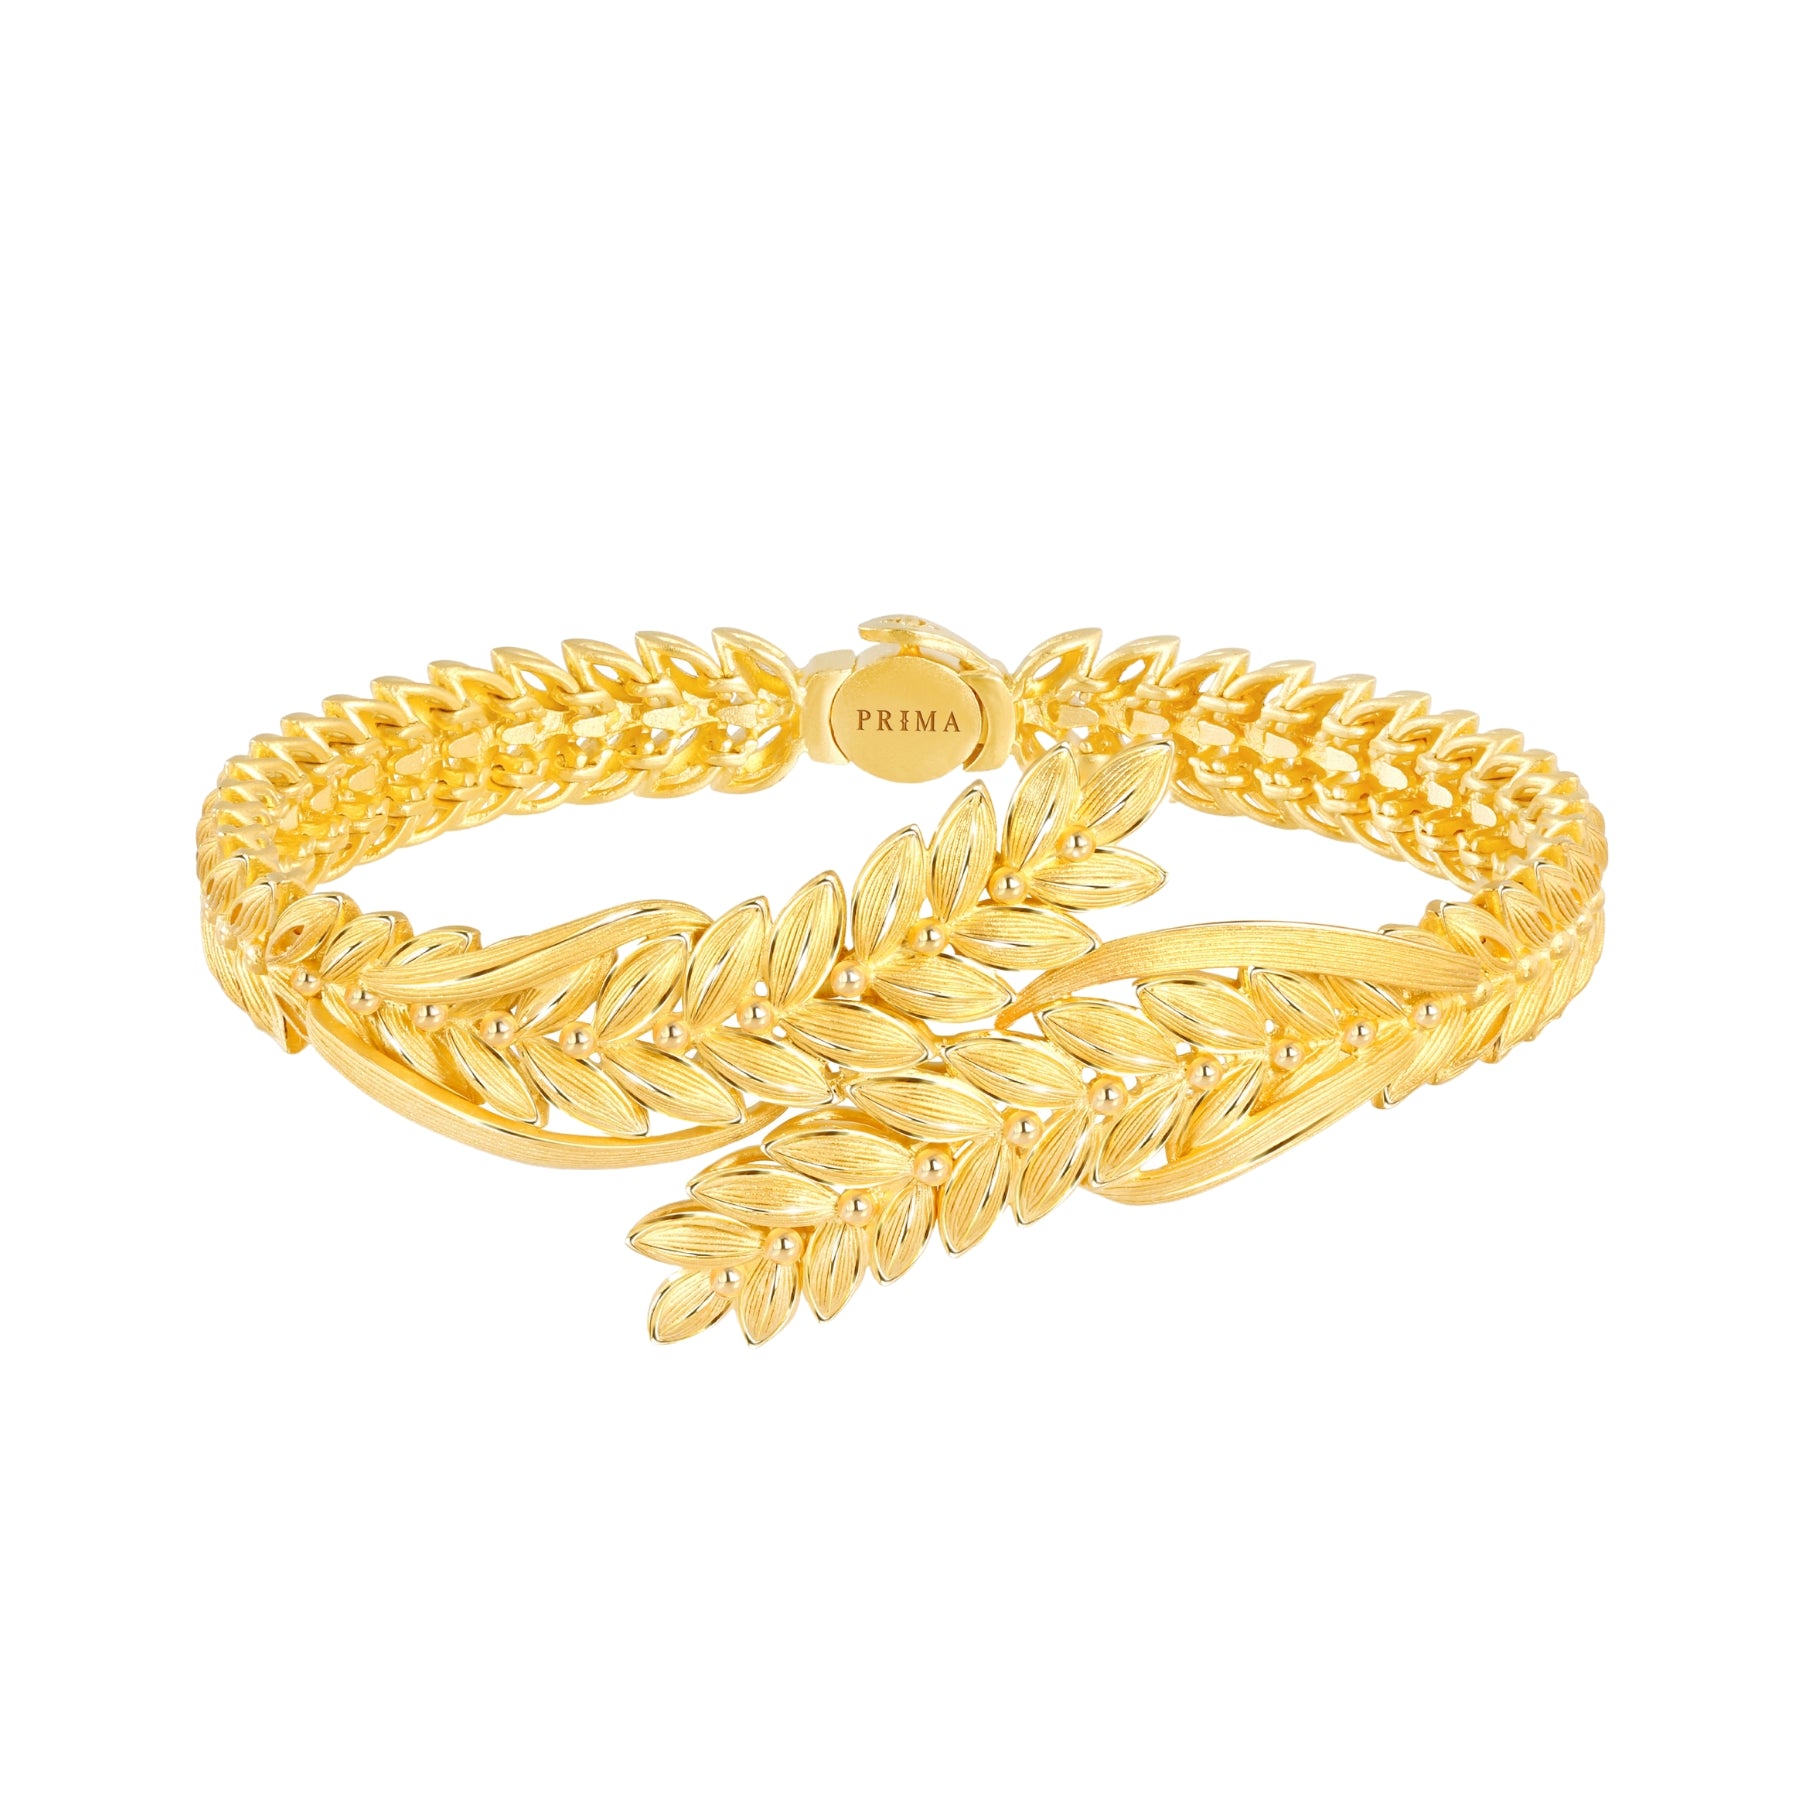 24K 995 Pure Gold Double sided Bracelet with CZ For Women - 1-GBR-V00592 in  22.760 Grams